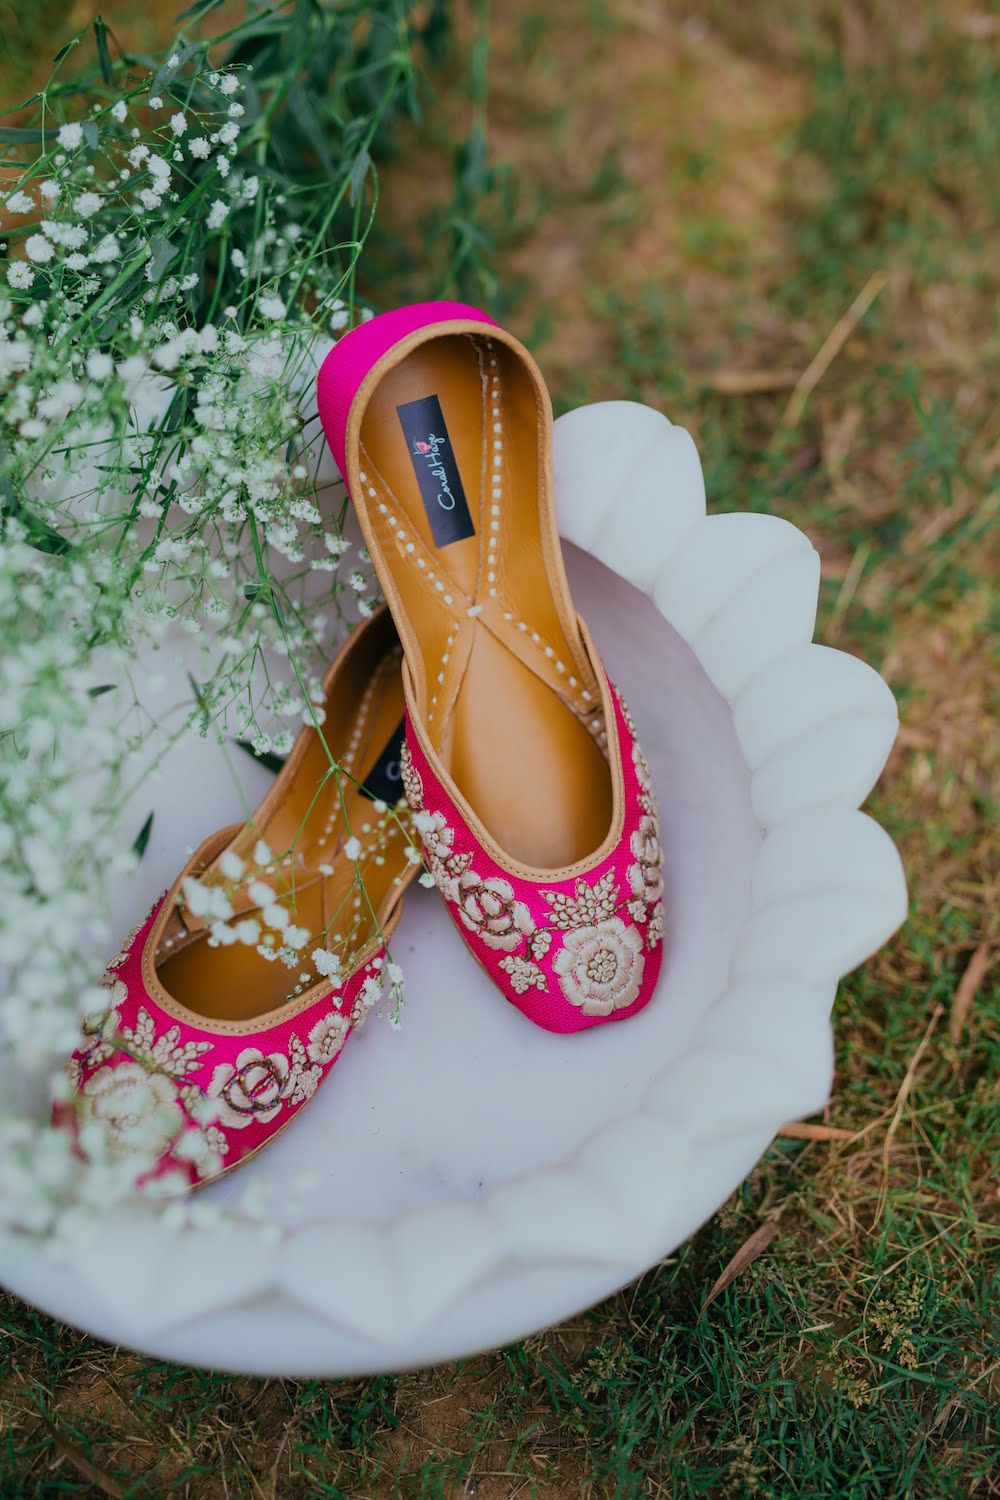 8 Ways To Add That'Barbie Pink' Touch To Your Wedding